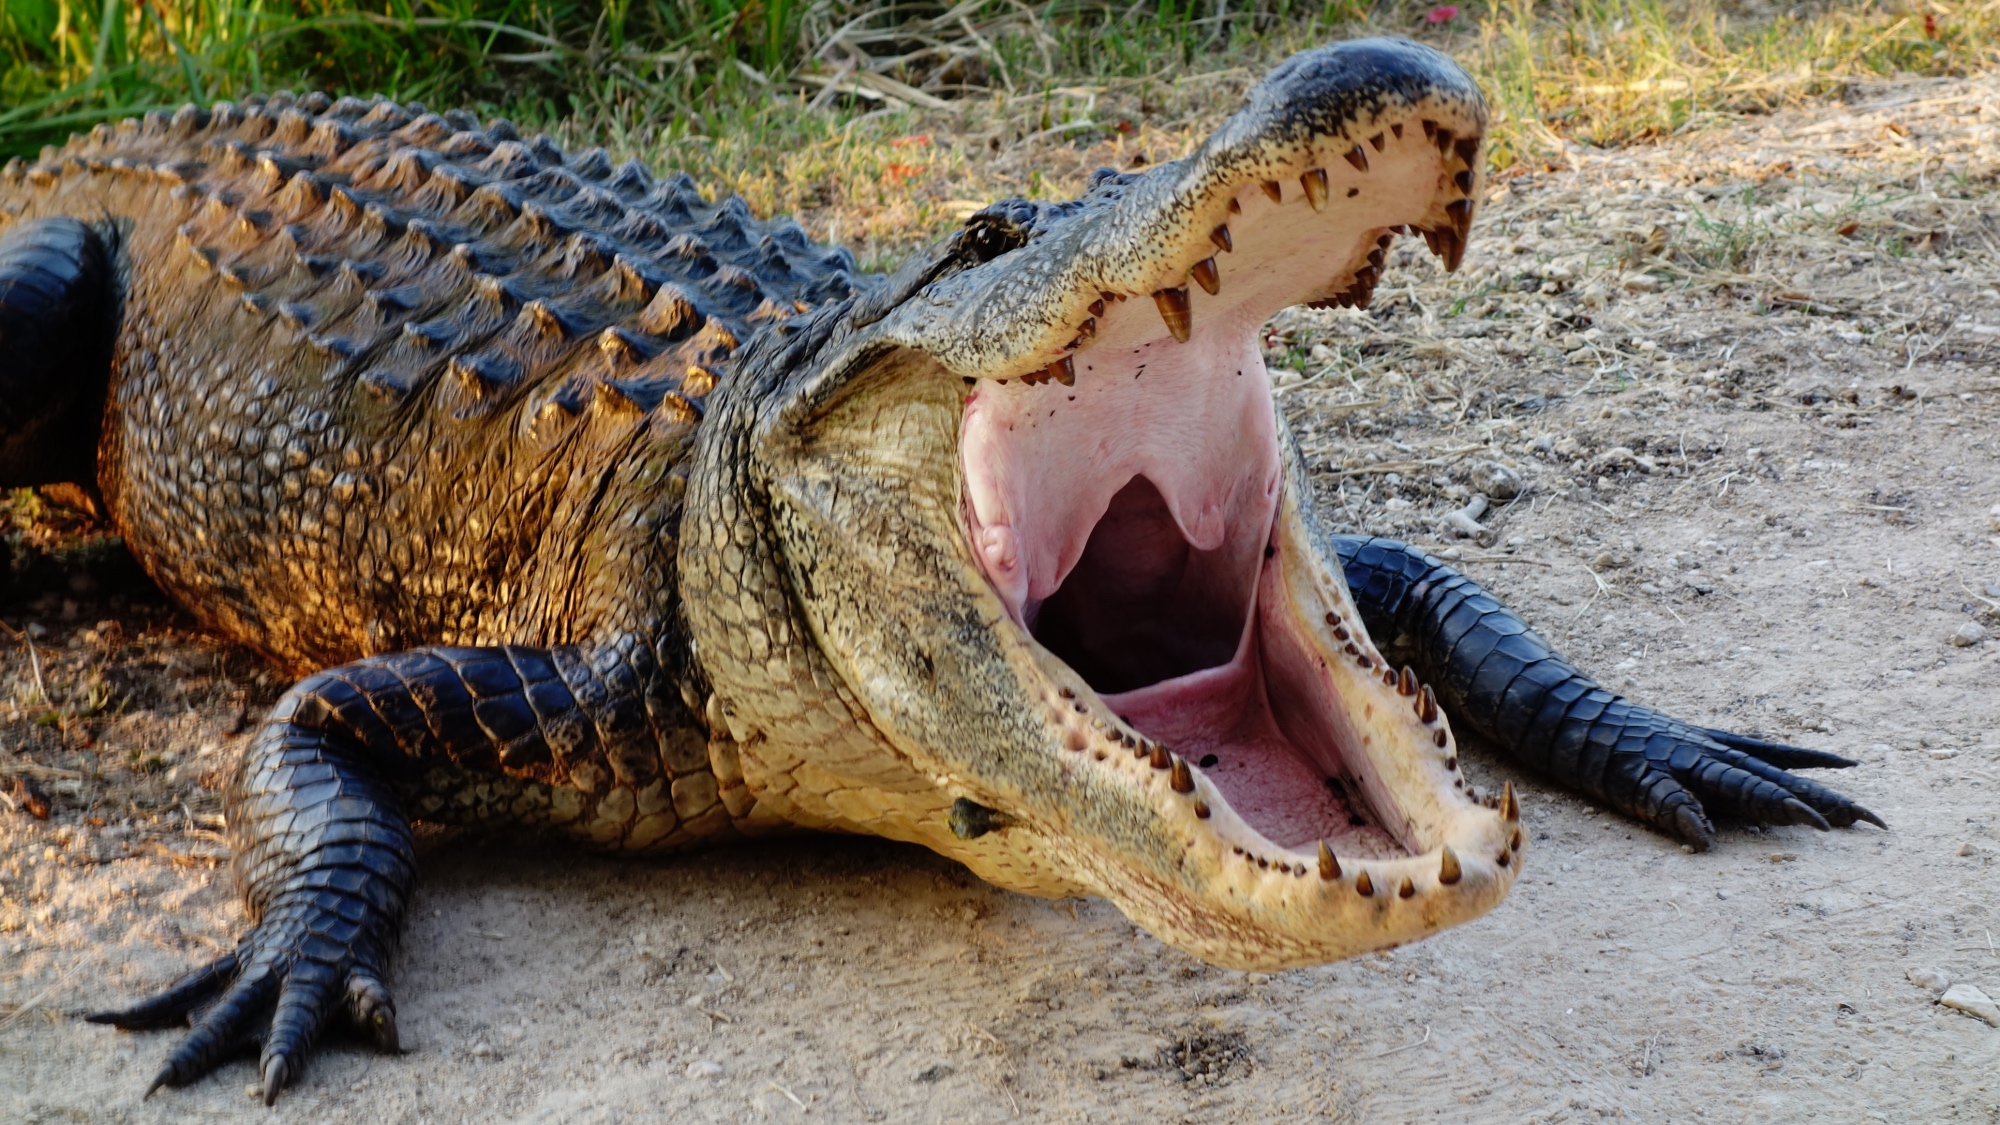 alligator with its mouth open